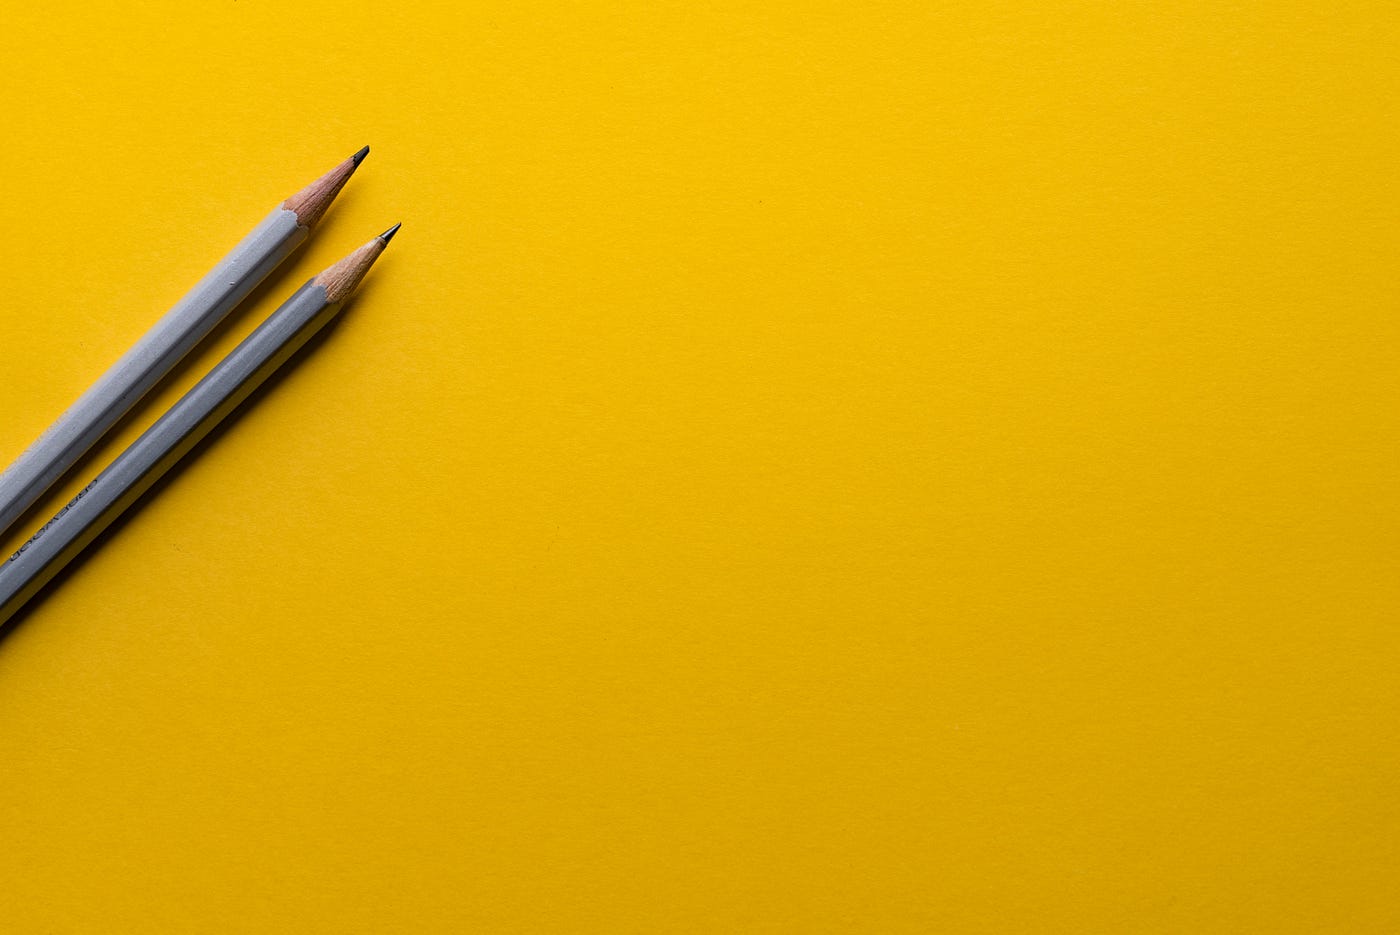 7 Writing Tools You Might Need as a Writer